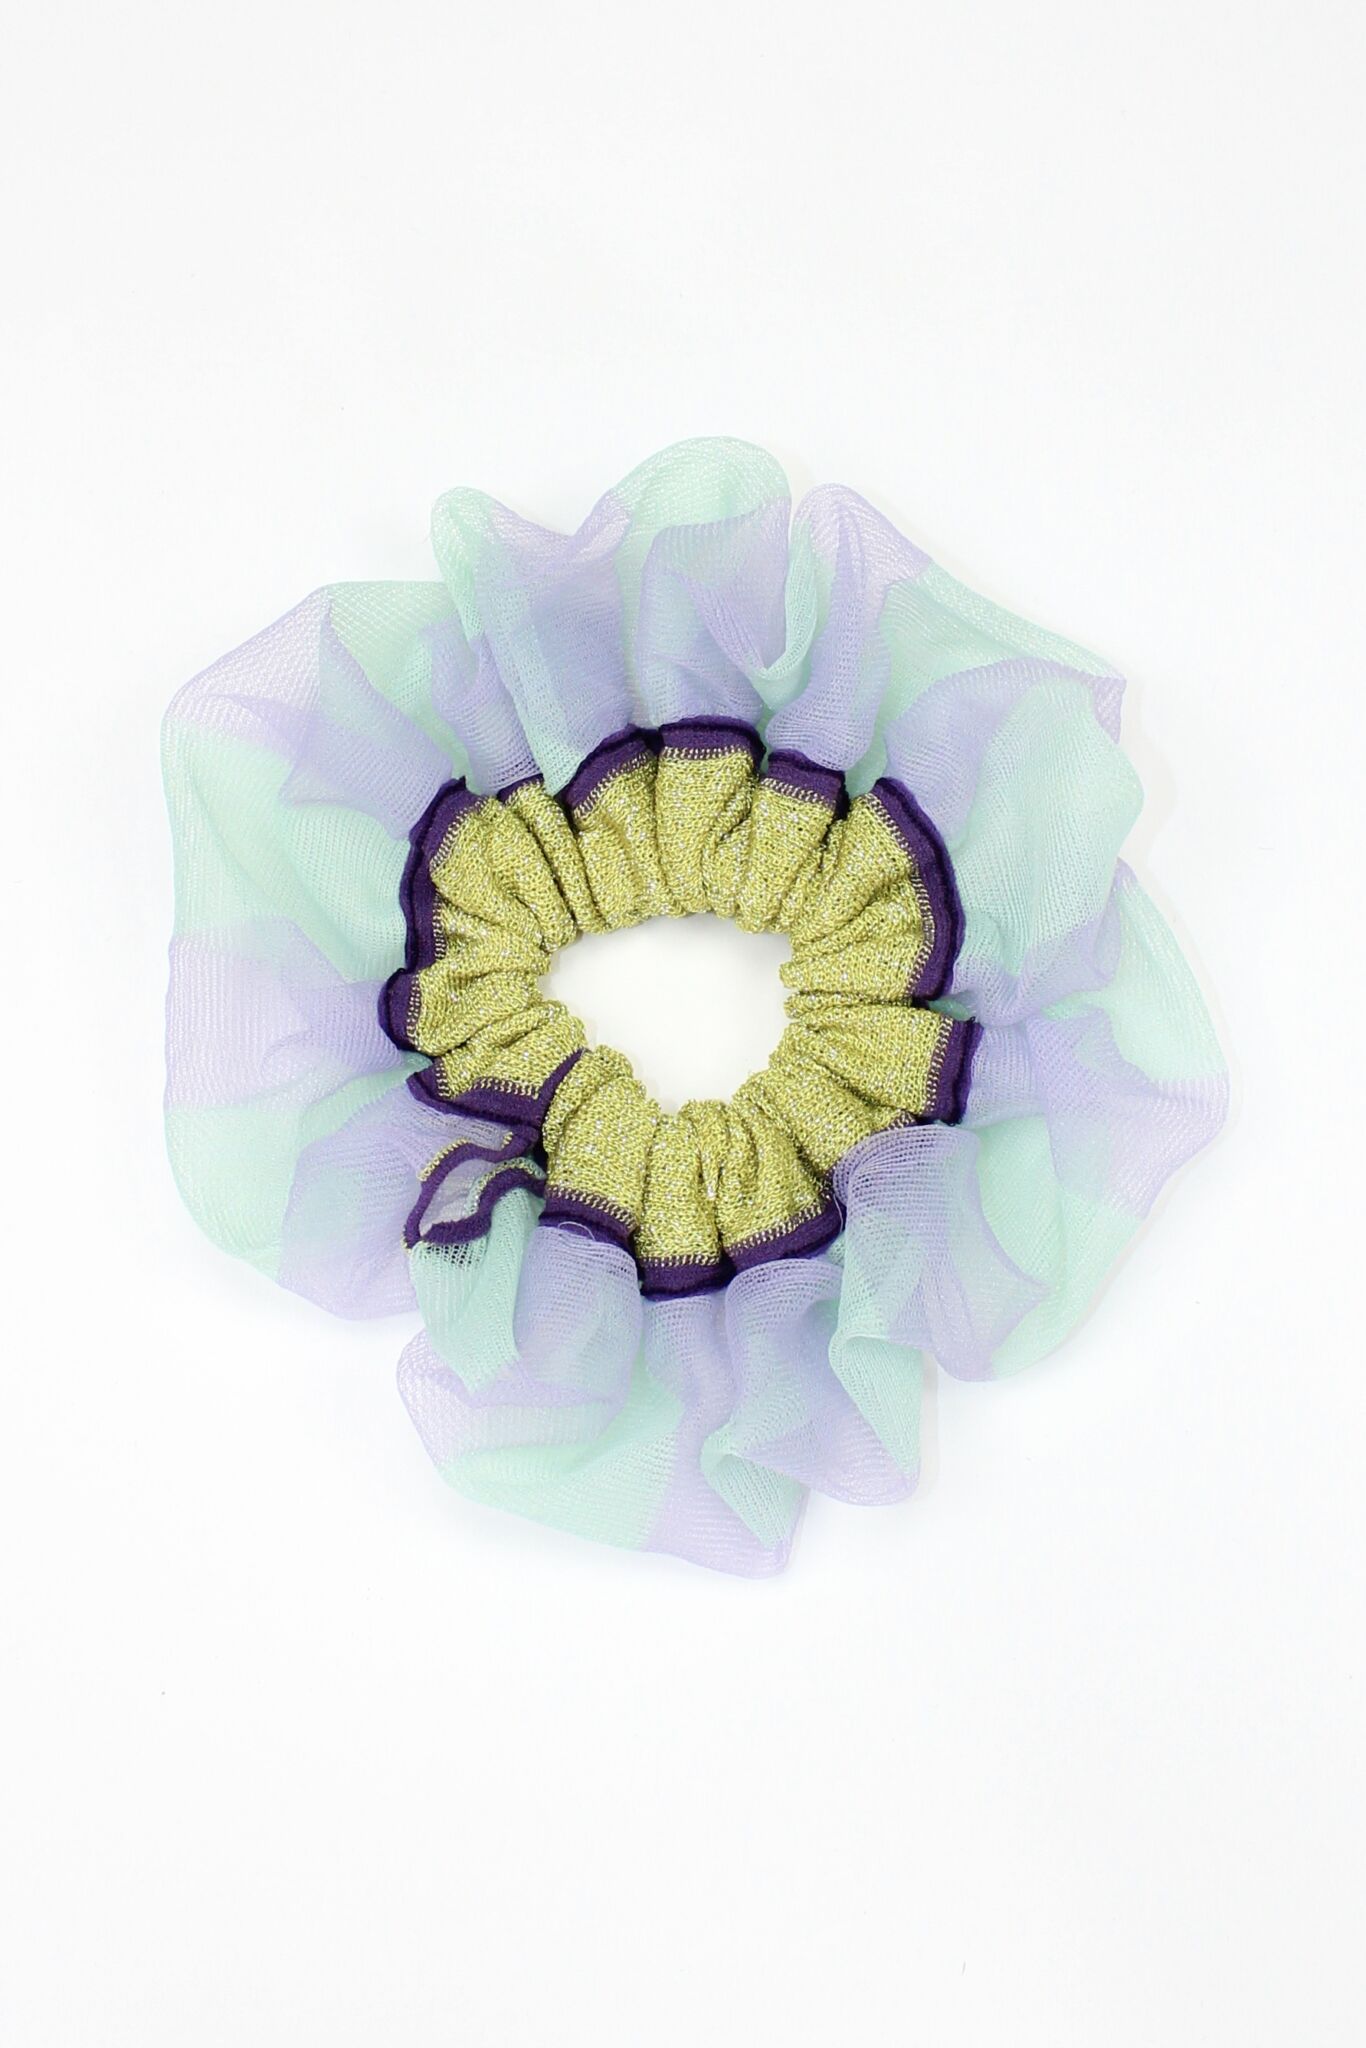 Petunia Scrunchie in mint green and lilac is a knitted scrunchie in bold stripes. Made of transparent and shimmery yarns.